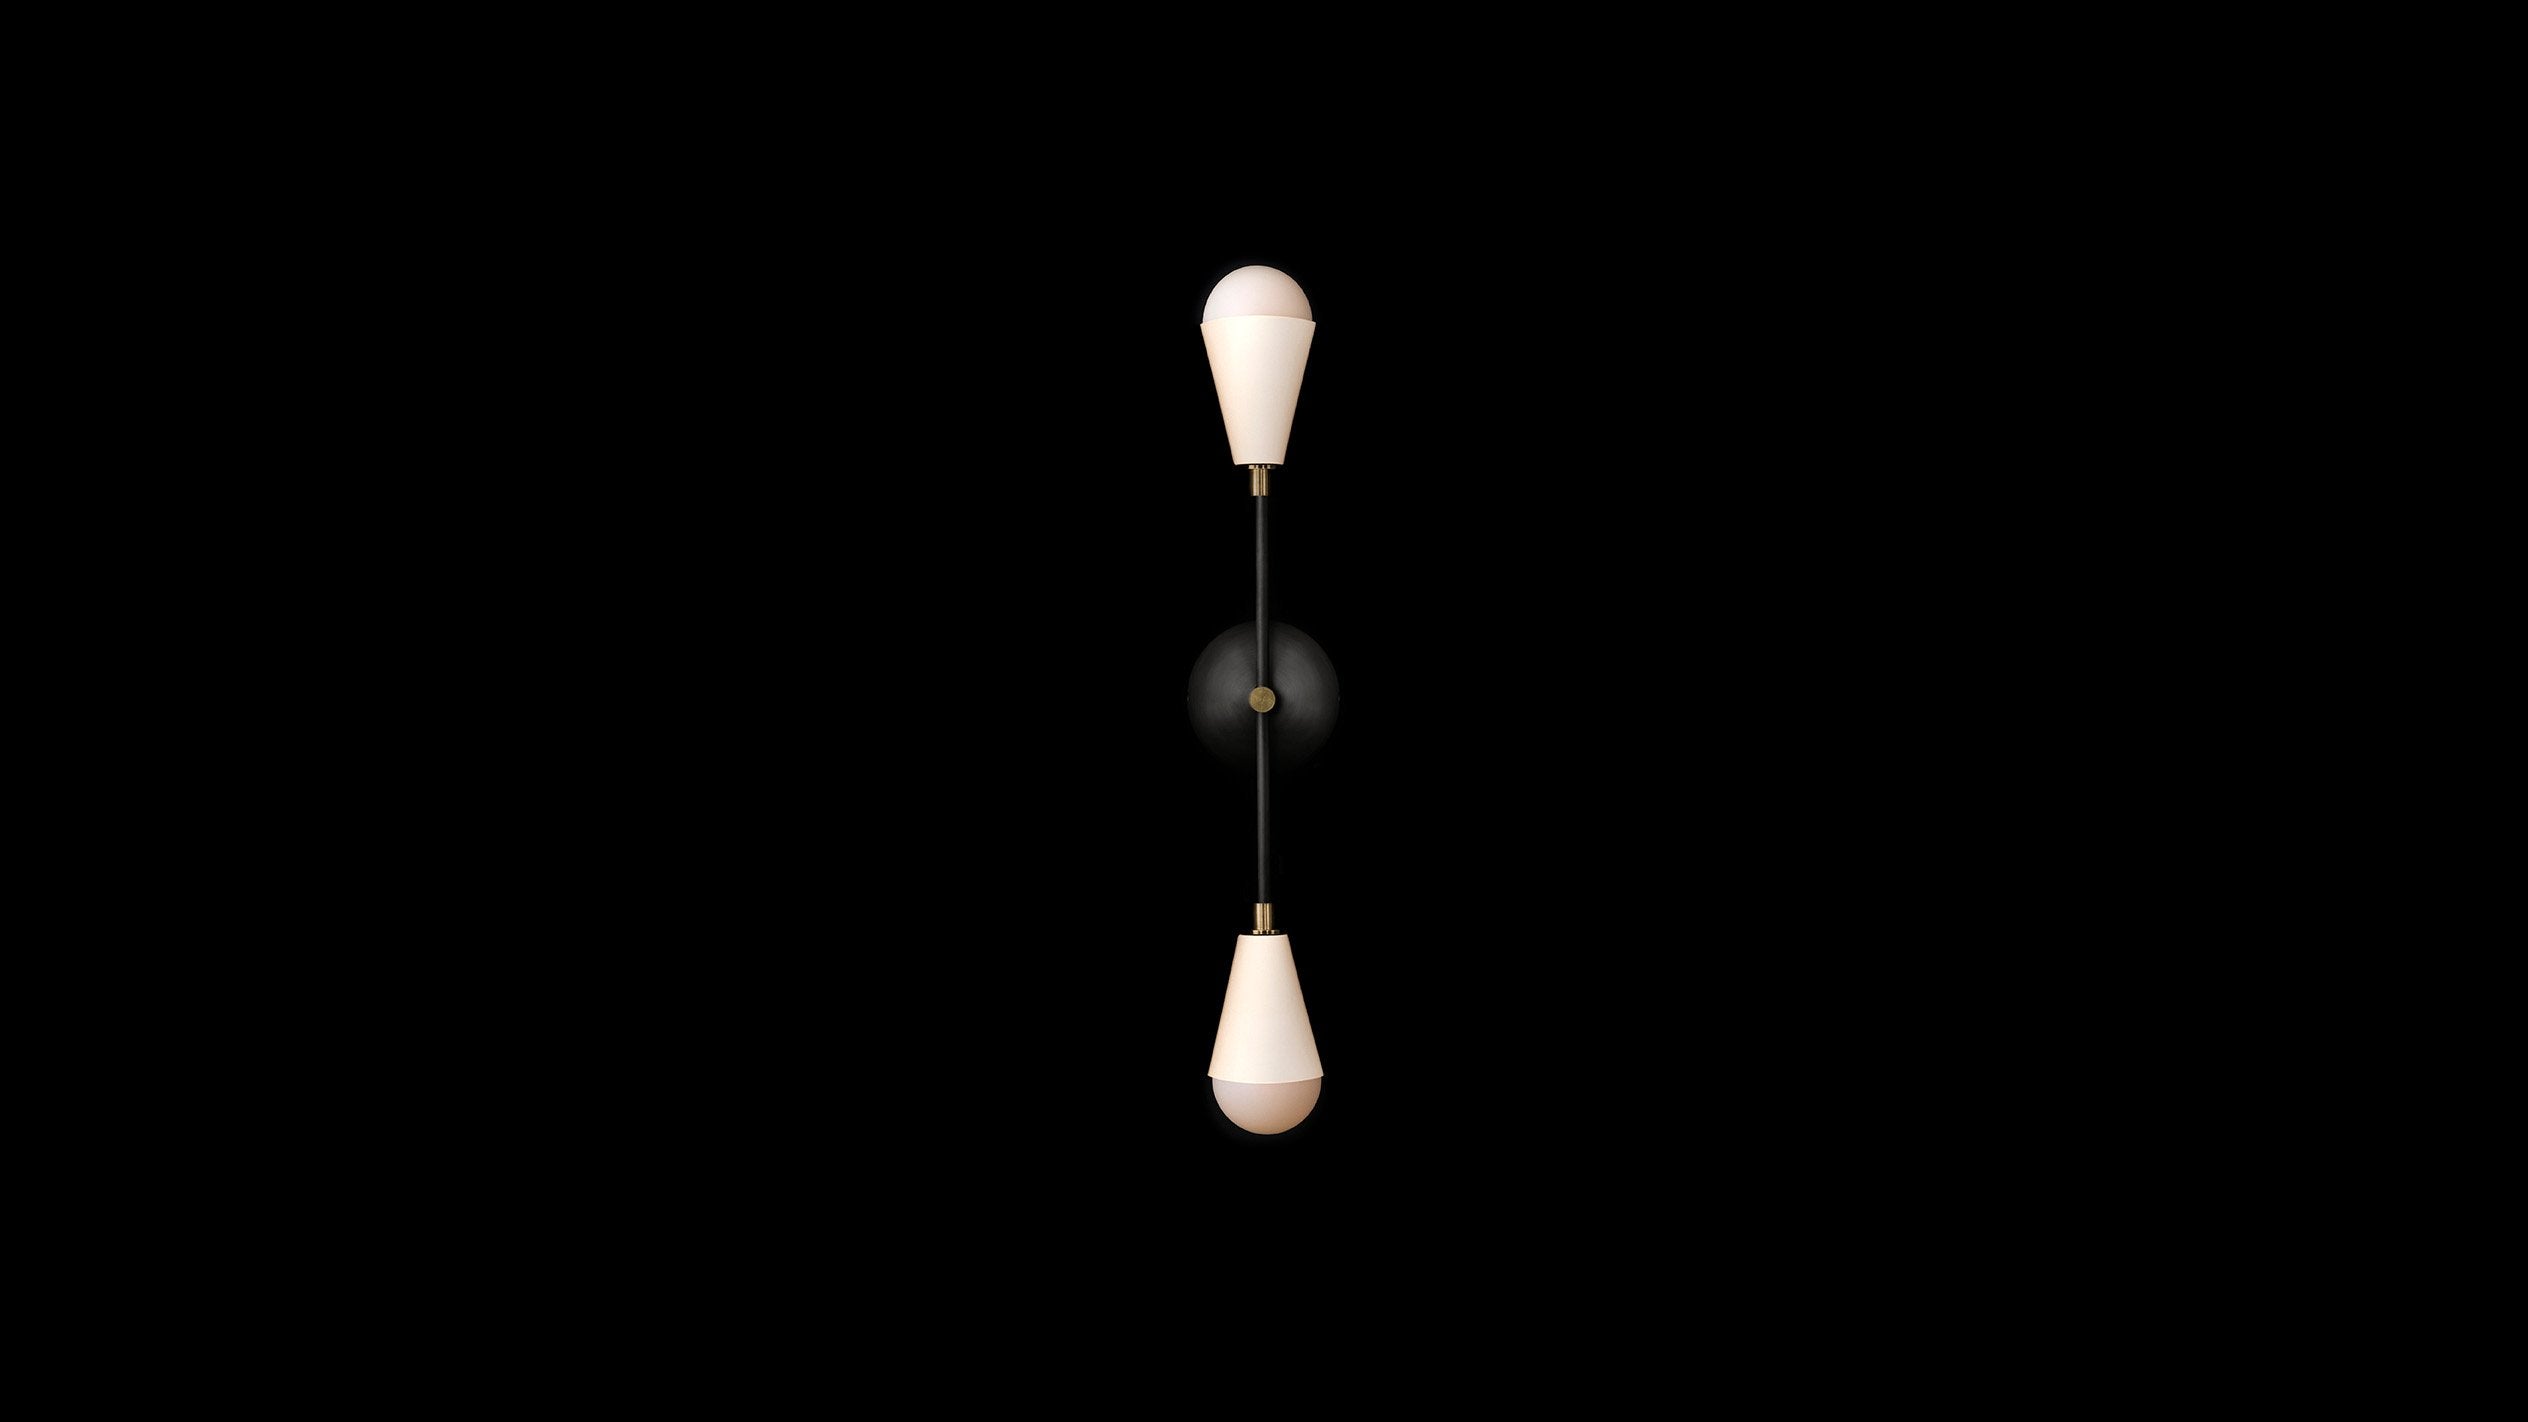 TRIAD : 2 sconce in Blackened Brass and Aged Brass finish with Porcelain, mounted vertically to a black wall. 